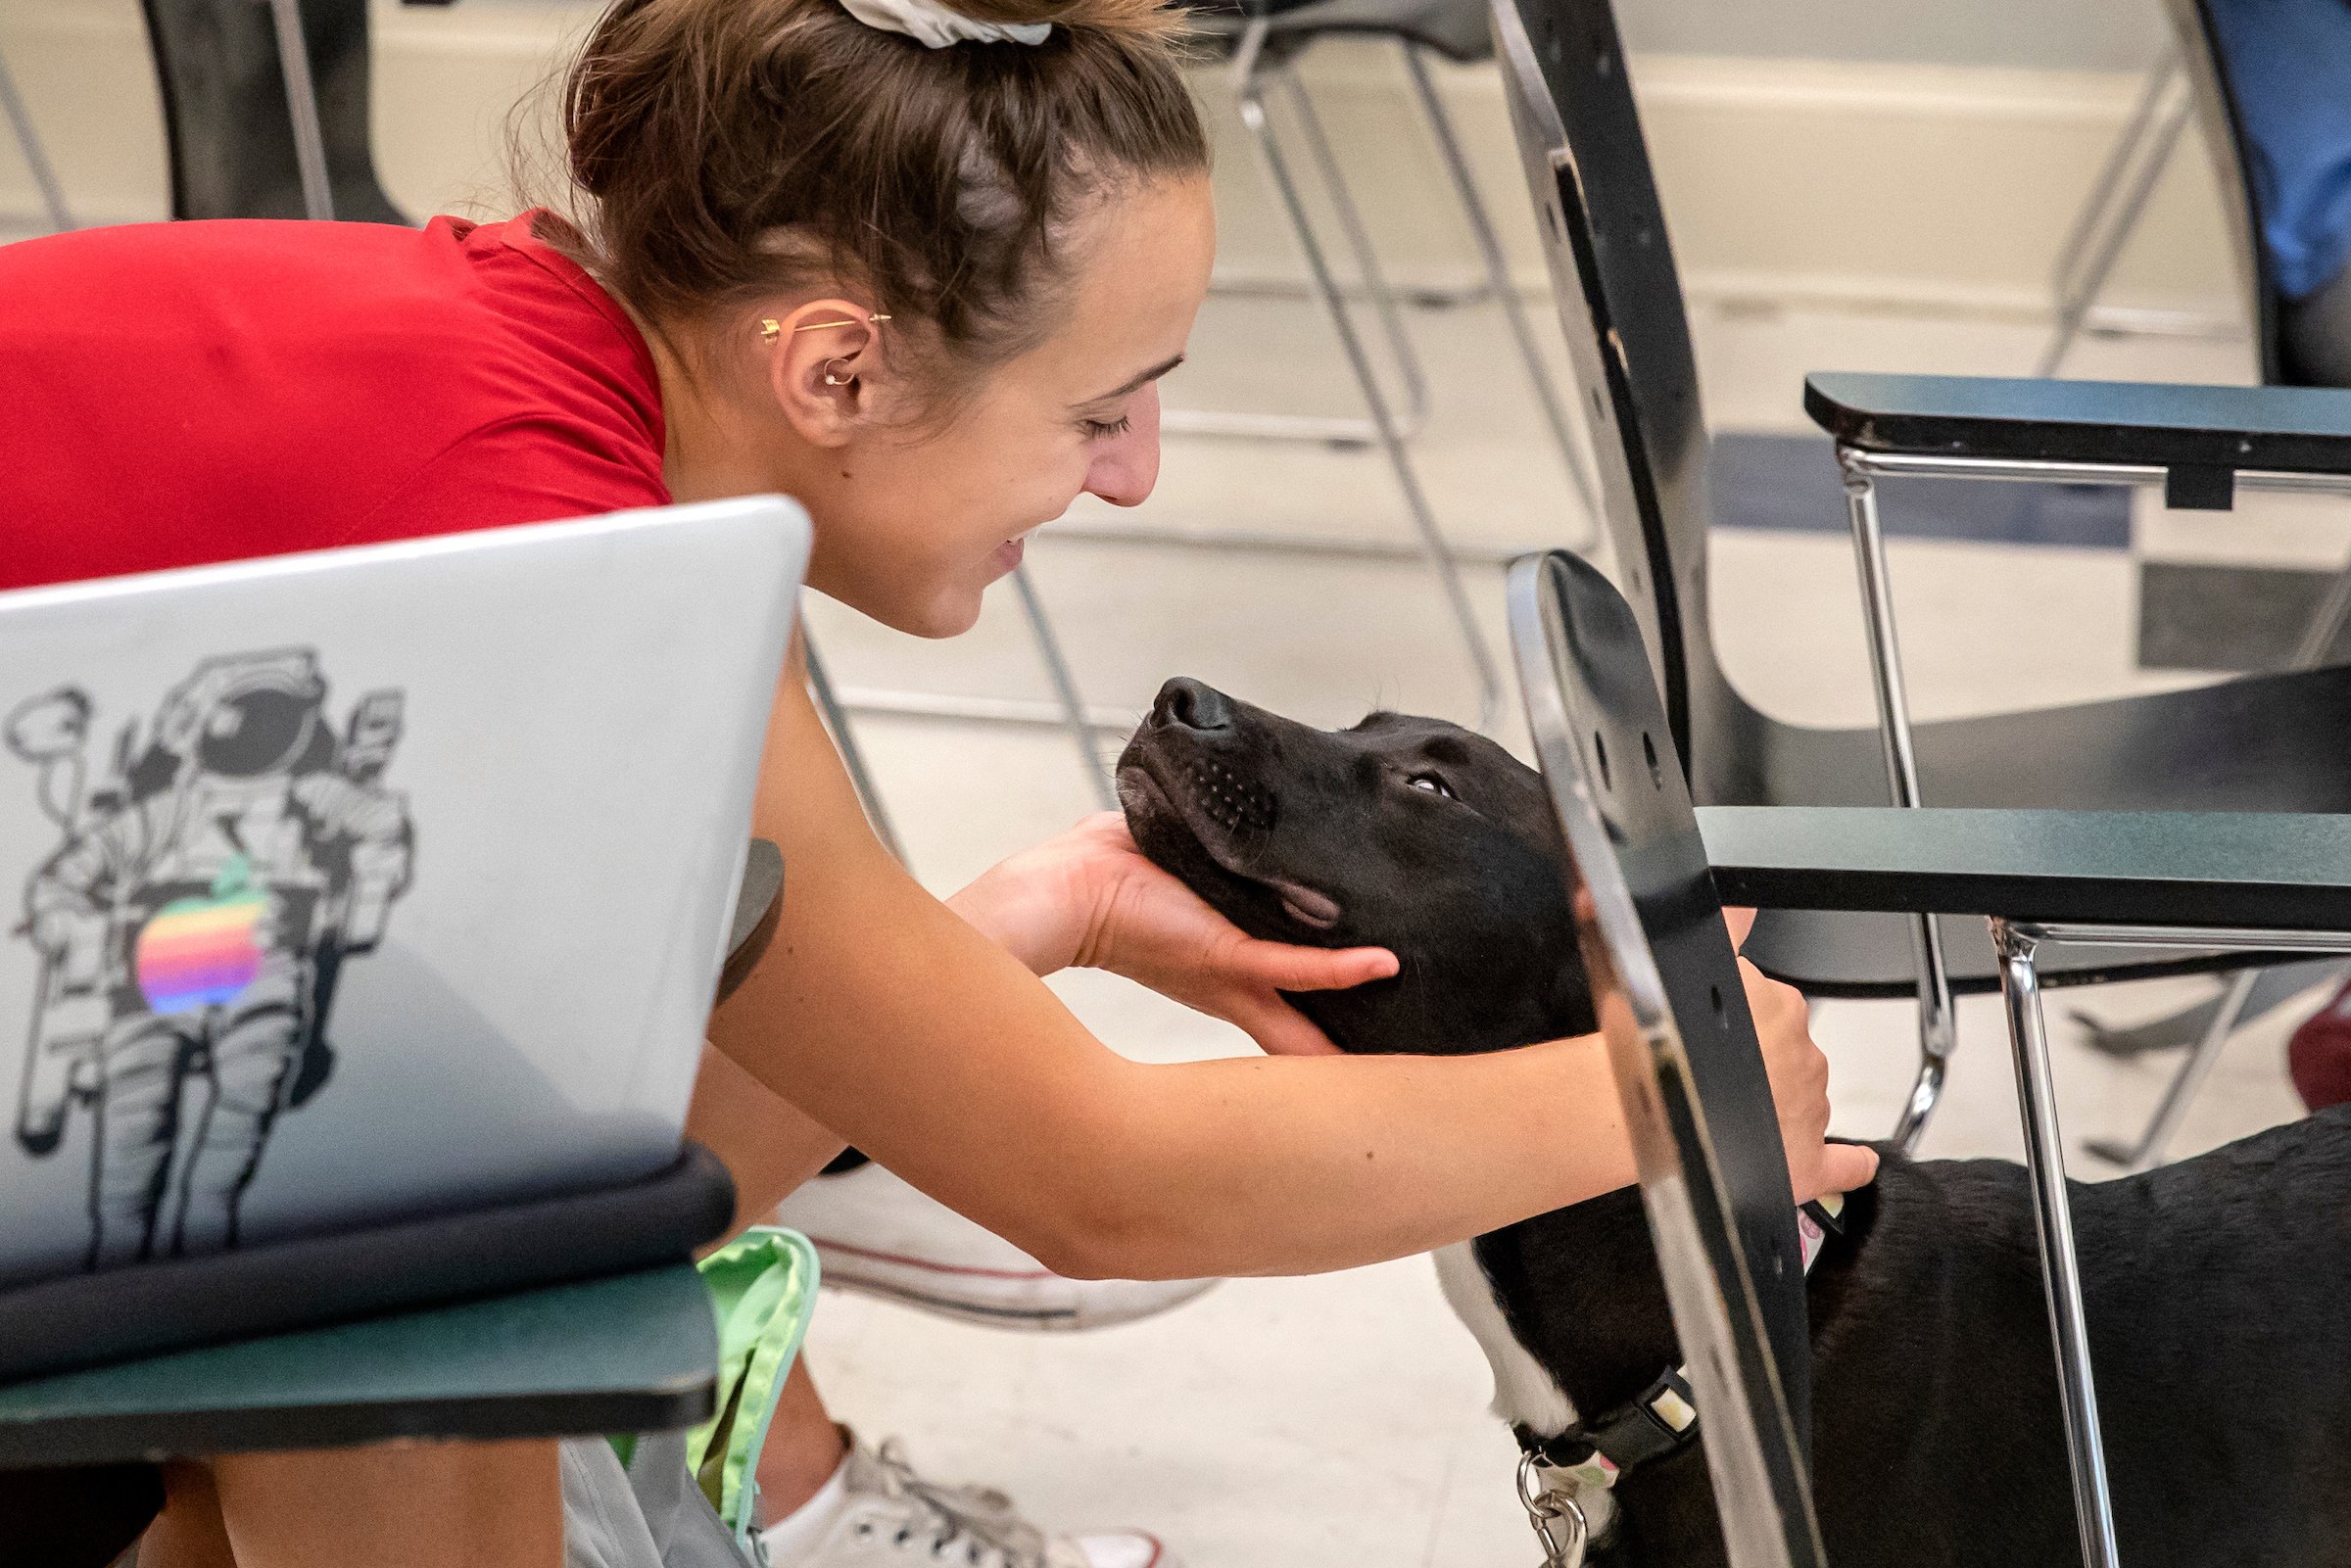 Rising senior Avery Mavroudis greets the dog Posey in anthropologist Margaret Wiener's "Canine Cultures" Maymester class. (photo by Johnny Andrews) Avery leans down to pet the black dog, Posey, who gazes up at her.